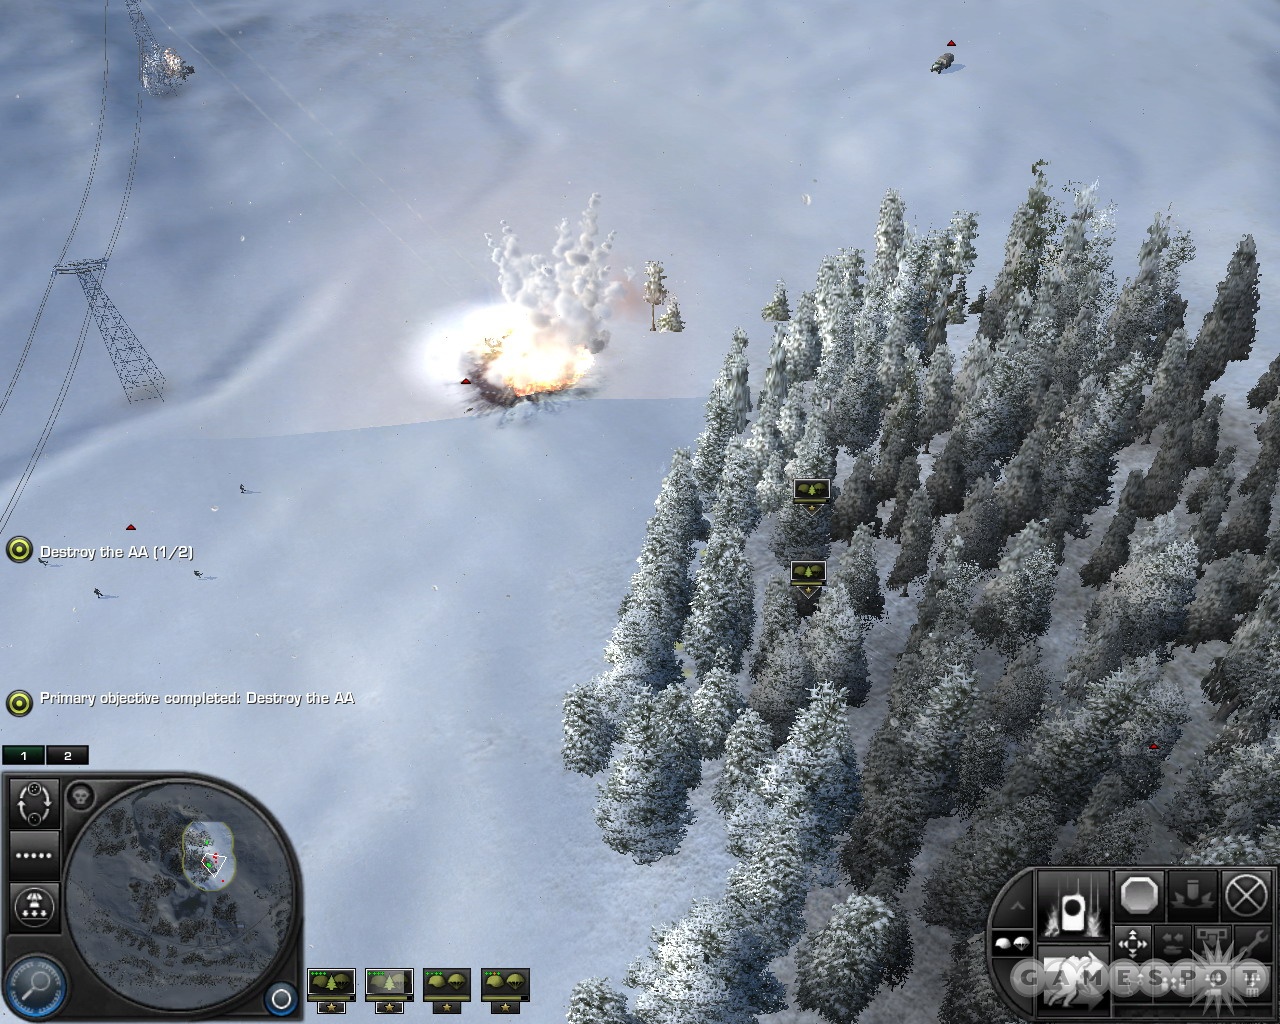 Airborne infantry strikes aren't very powerful, but they'll take out these vehicles well enough.